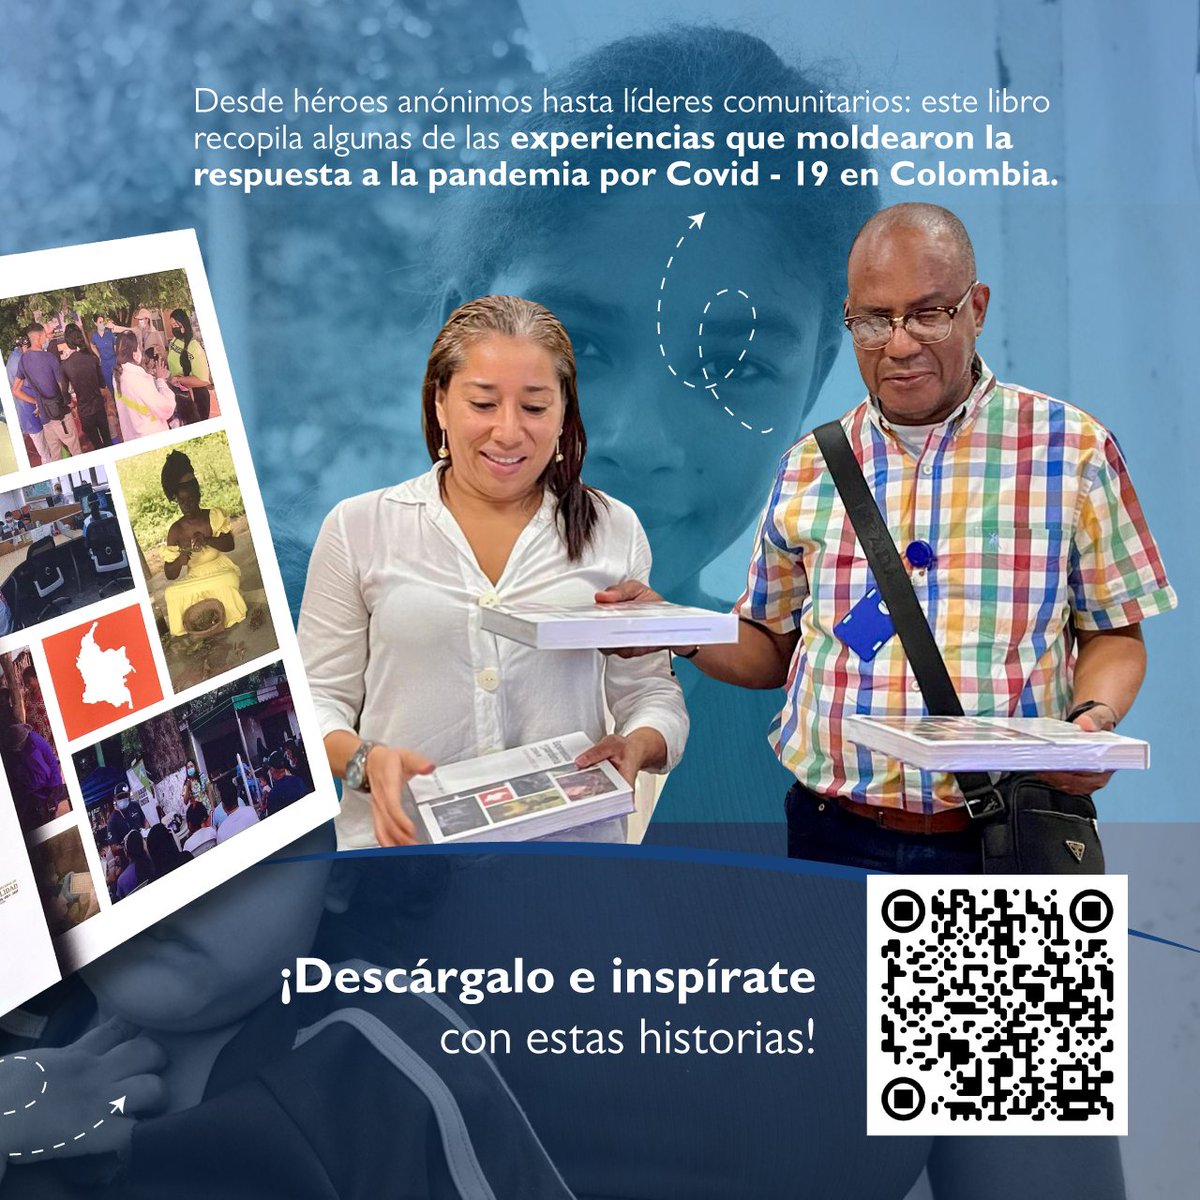 USAID_Colombia tweet picture